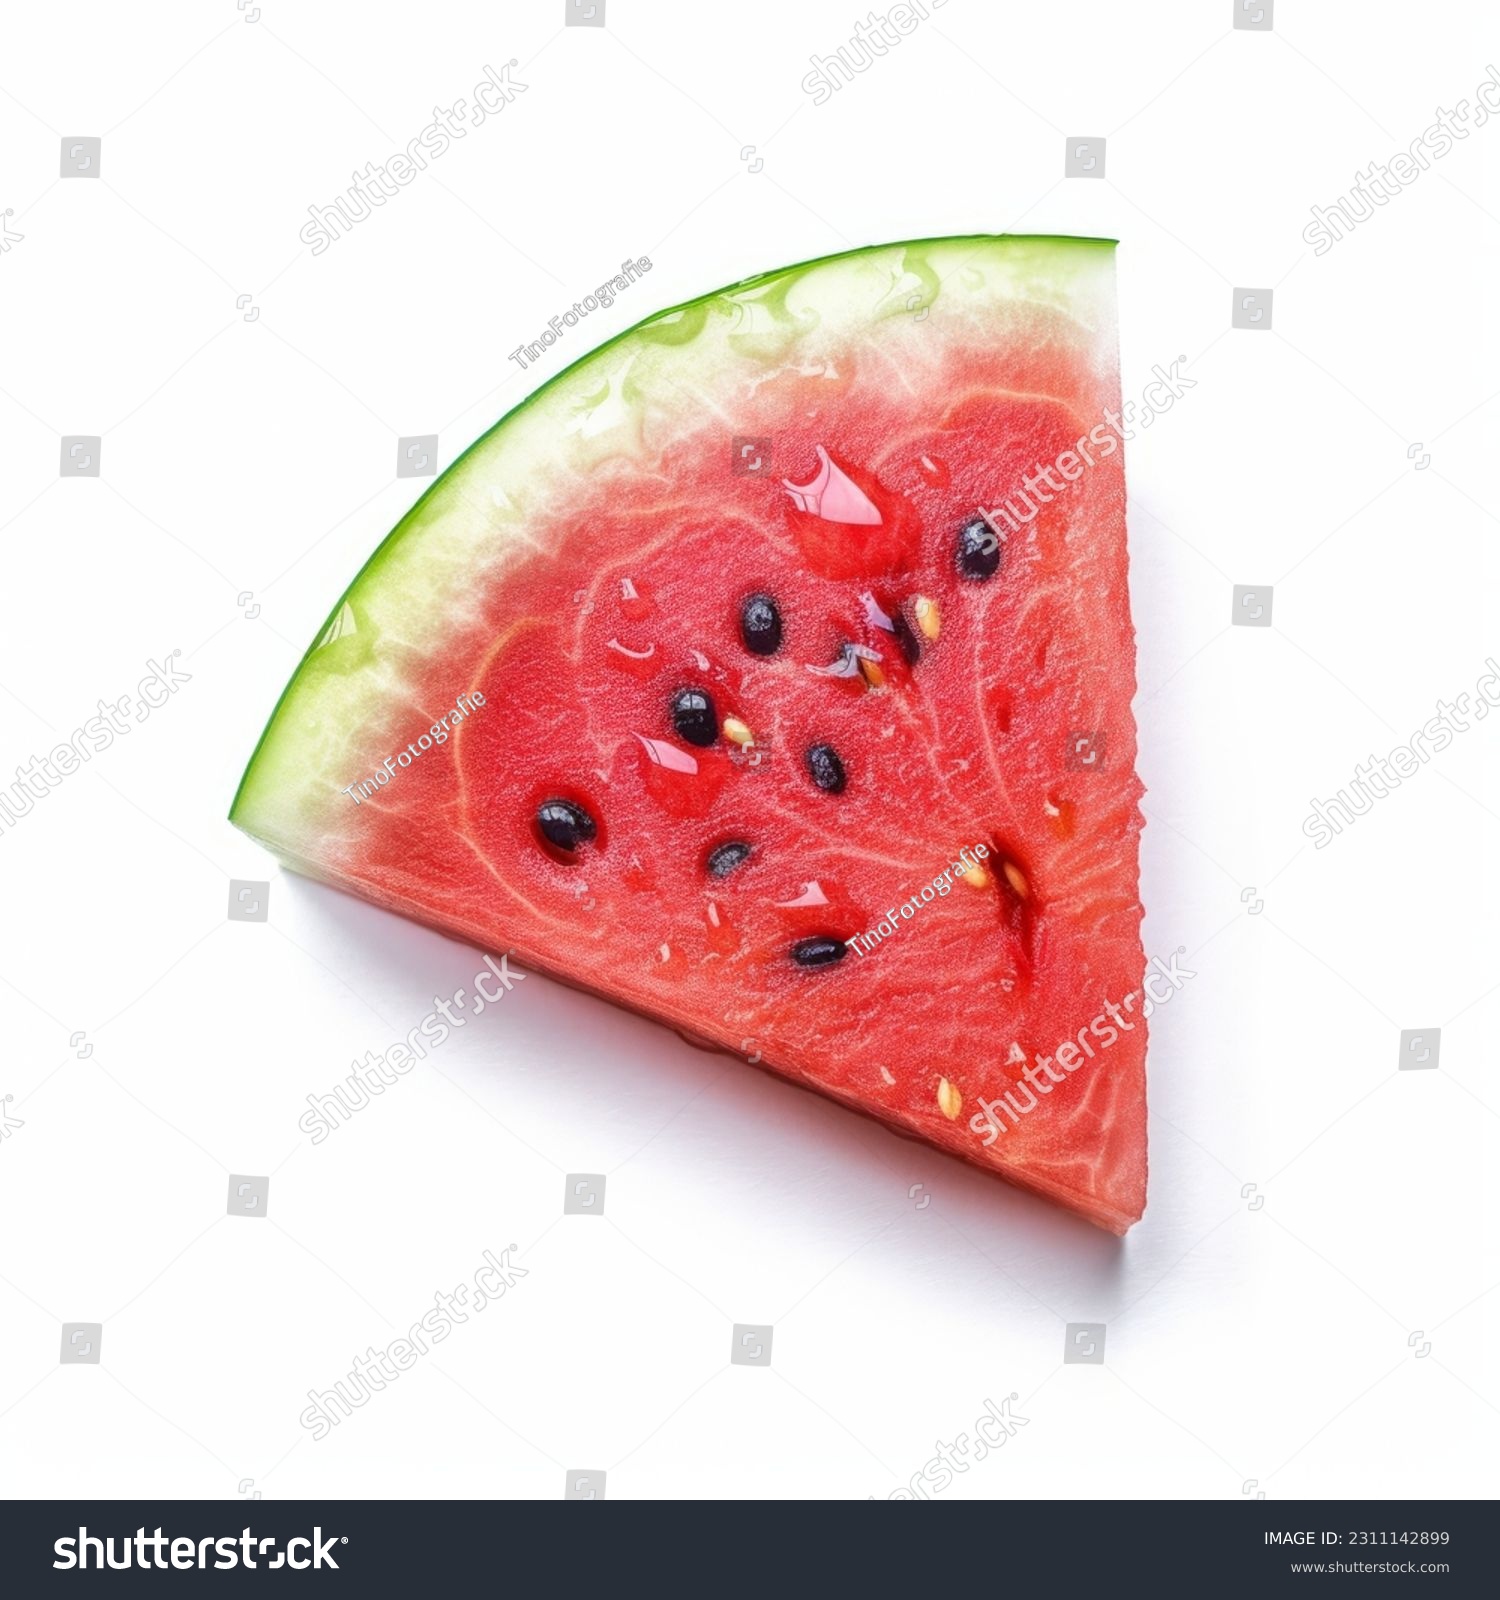 watermelon on white background. High quality photo #2311142899